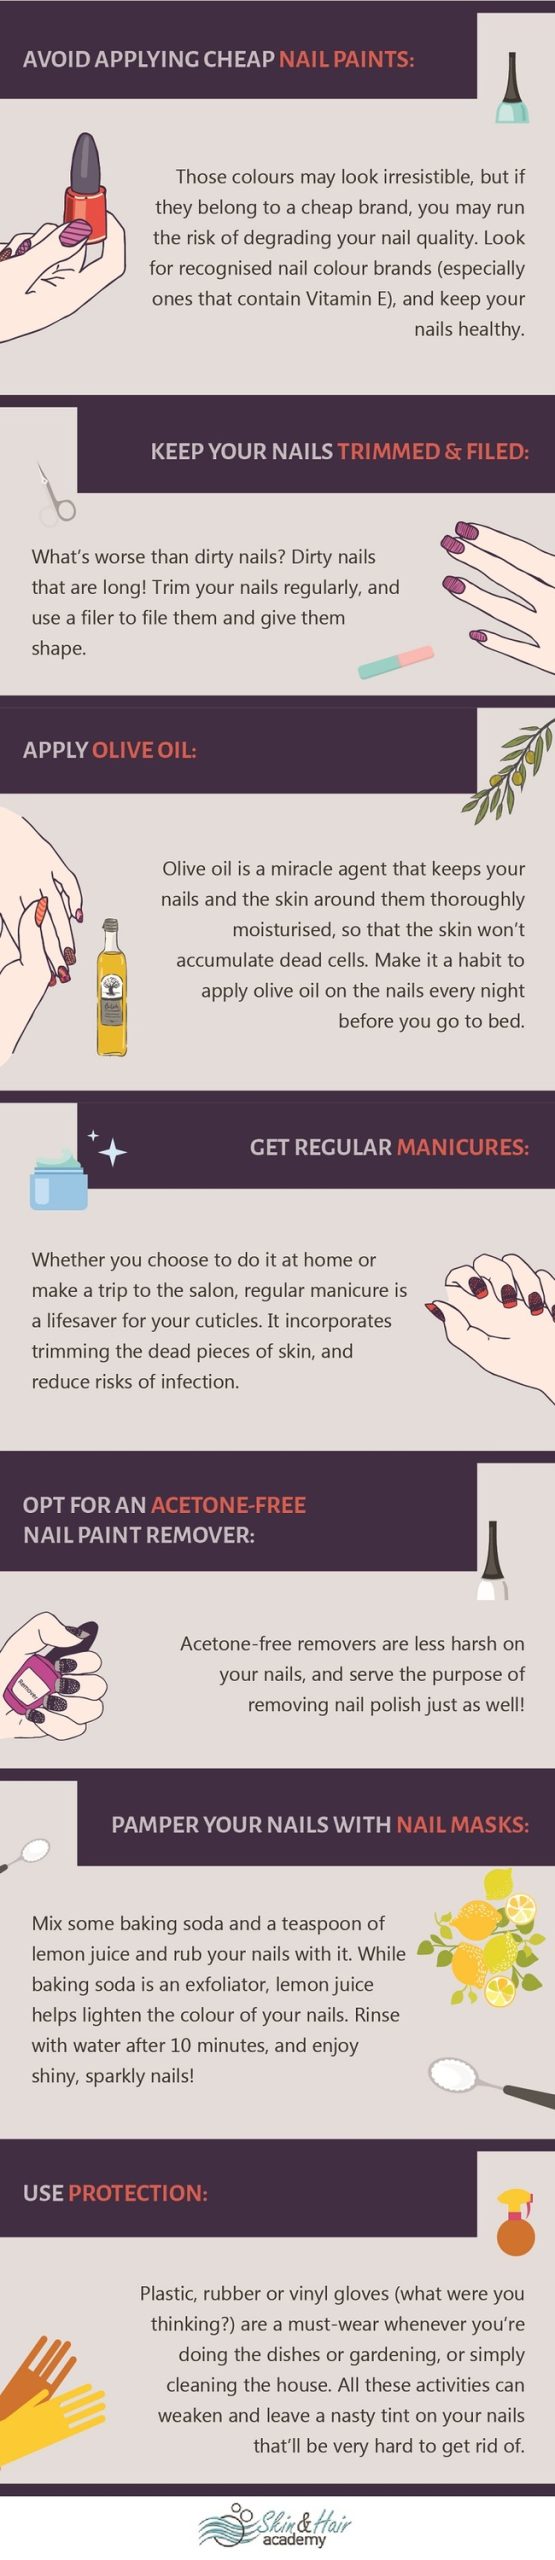 7 Ways how you can Keep Your Nails Looking Beautiful.